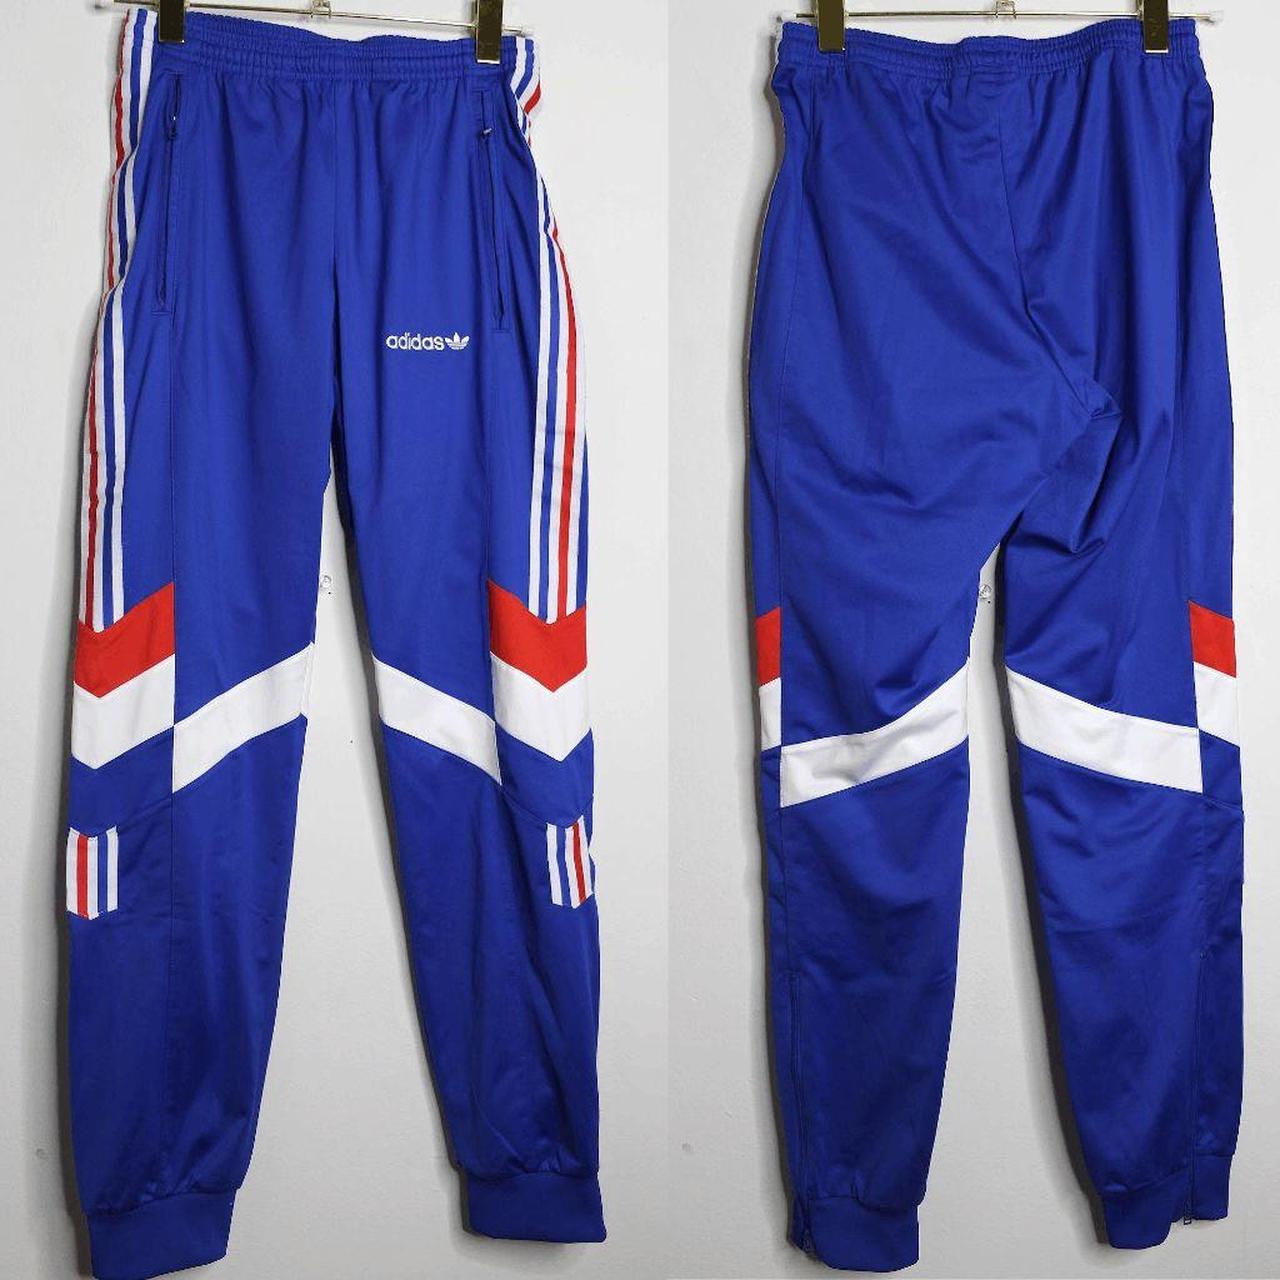 Adidas red white and blue retro vintage track suit - Depop